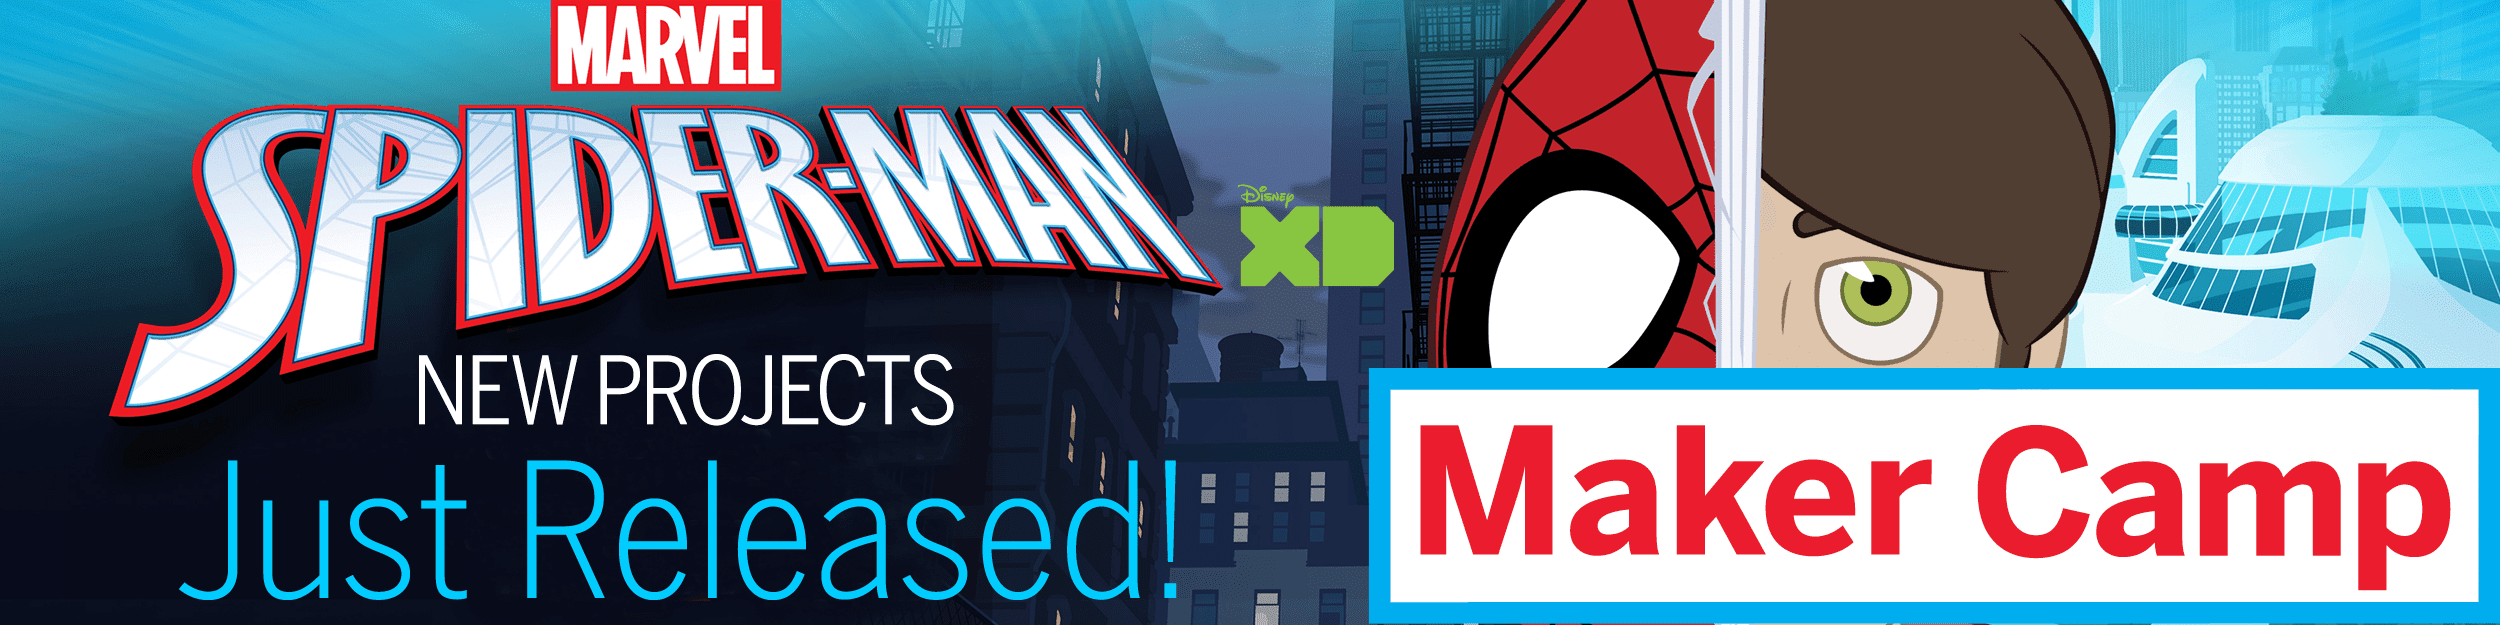 Maker Camp - Marvel’s Spider-Man Projects